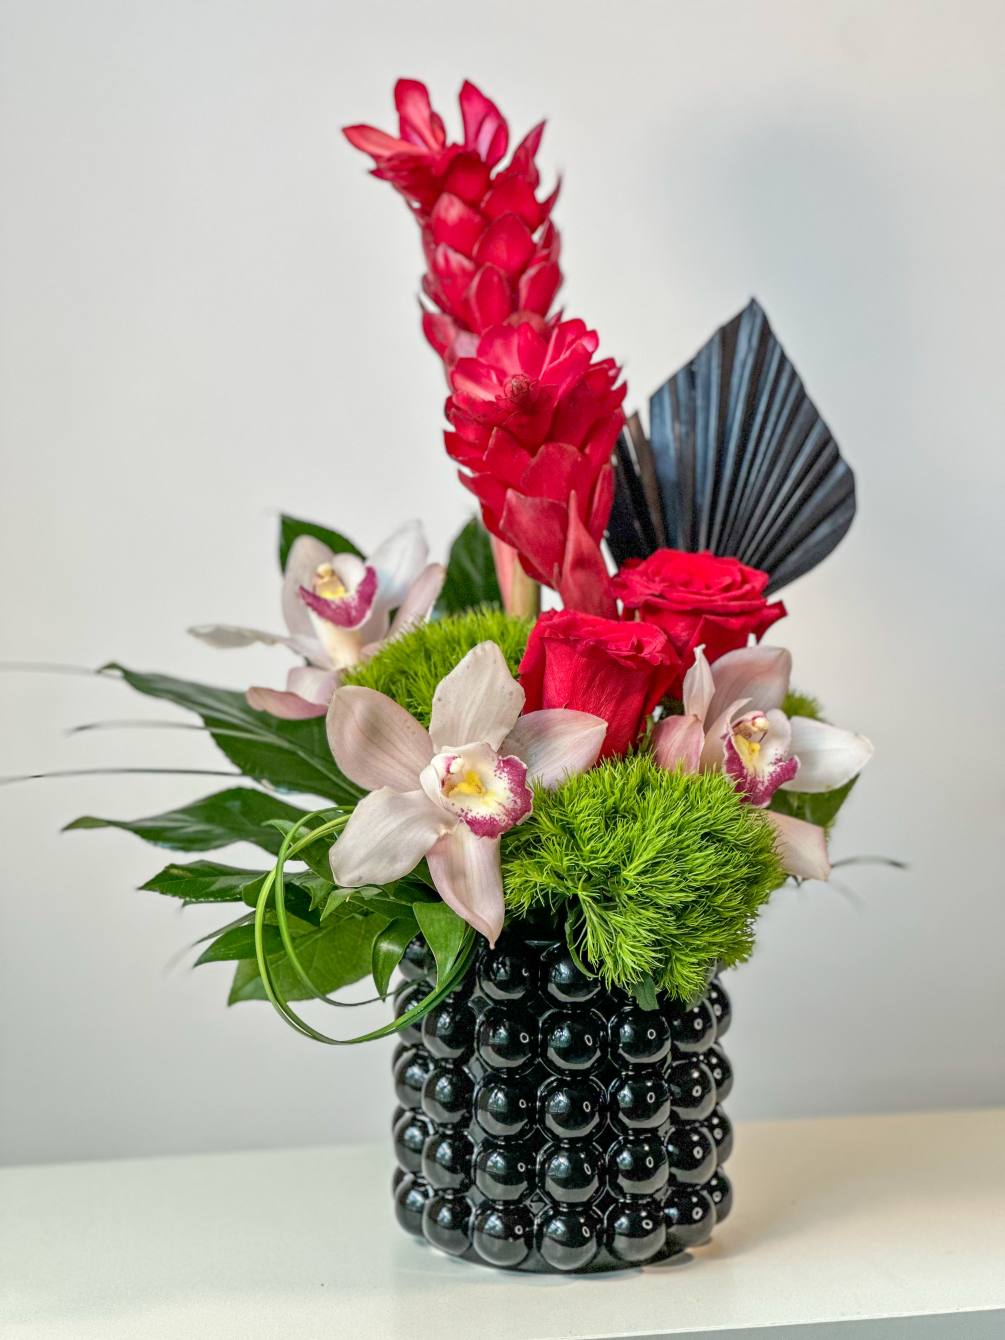 The vibrant combination of Ginger, Red Roses, and Cymbidium Orchid, paired with